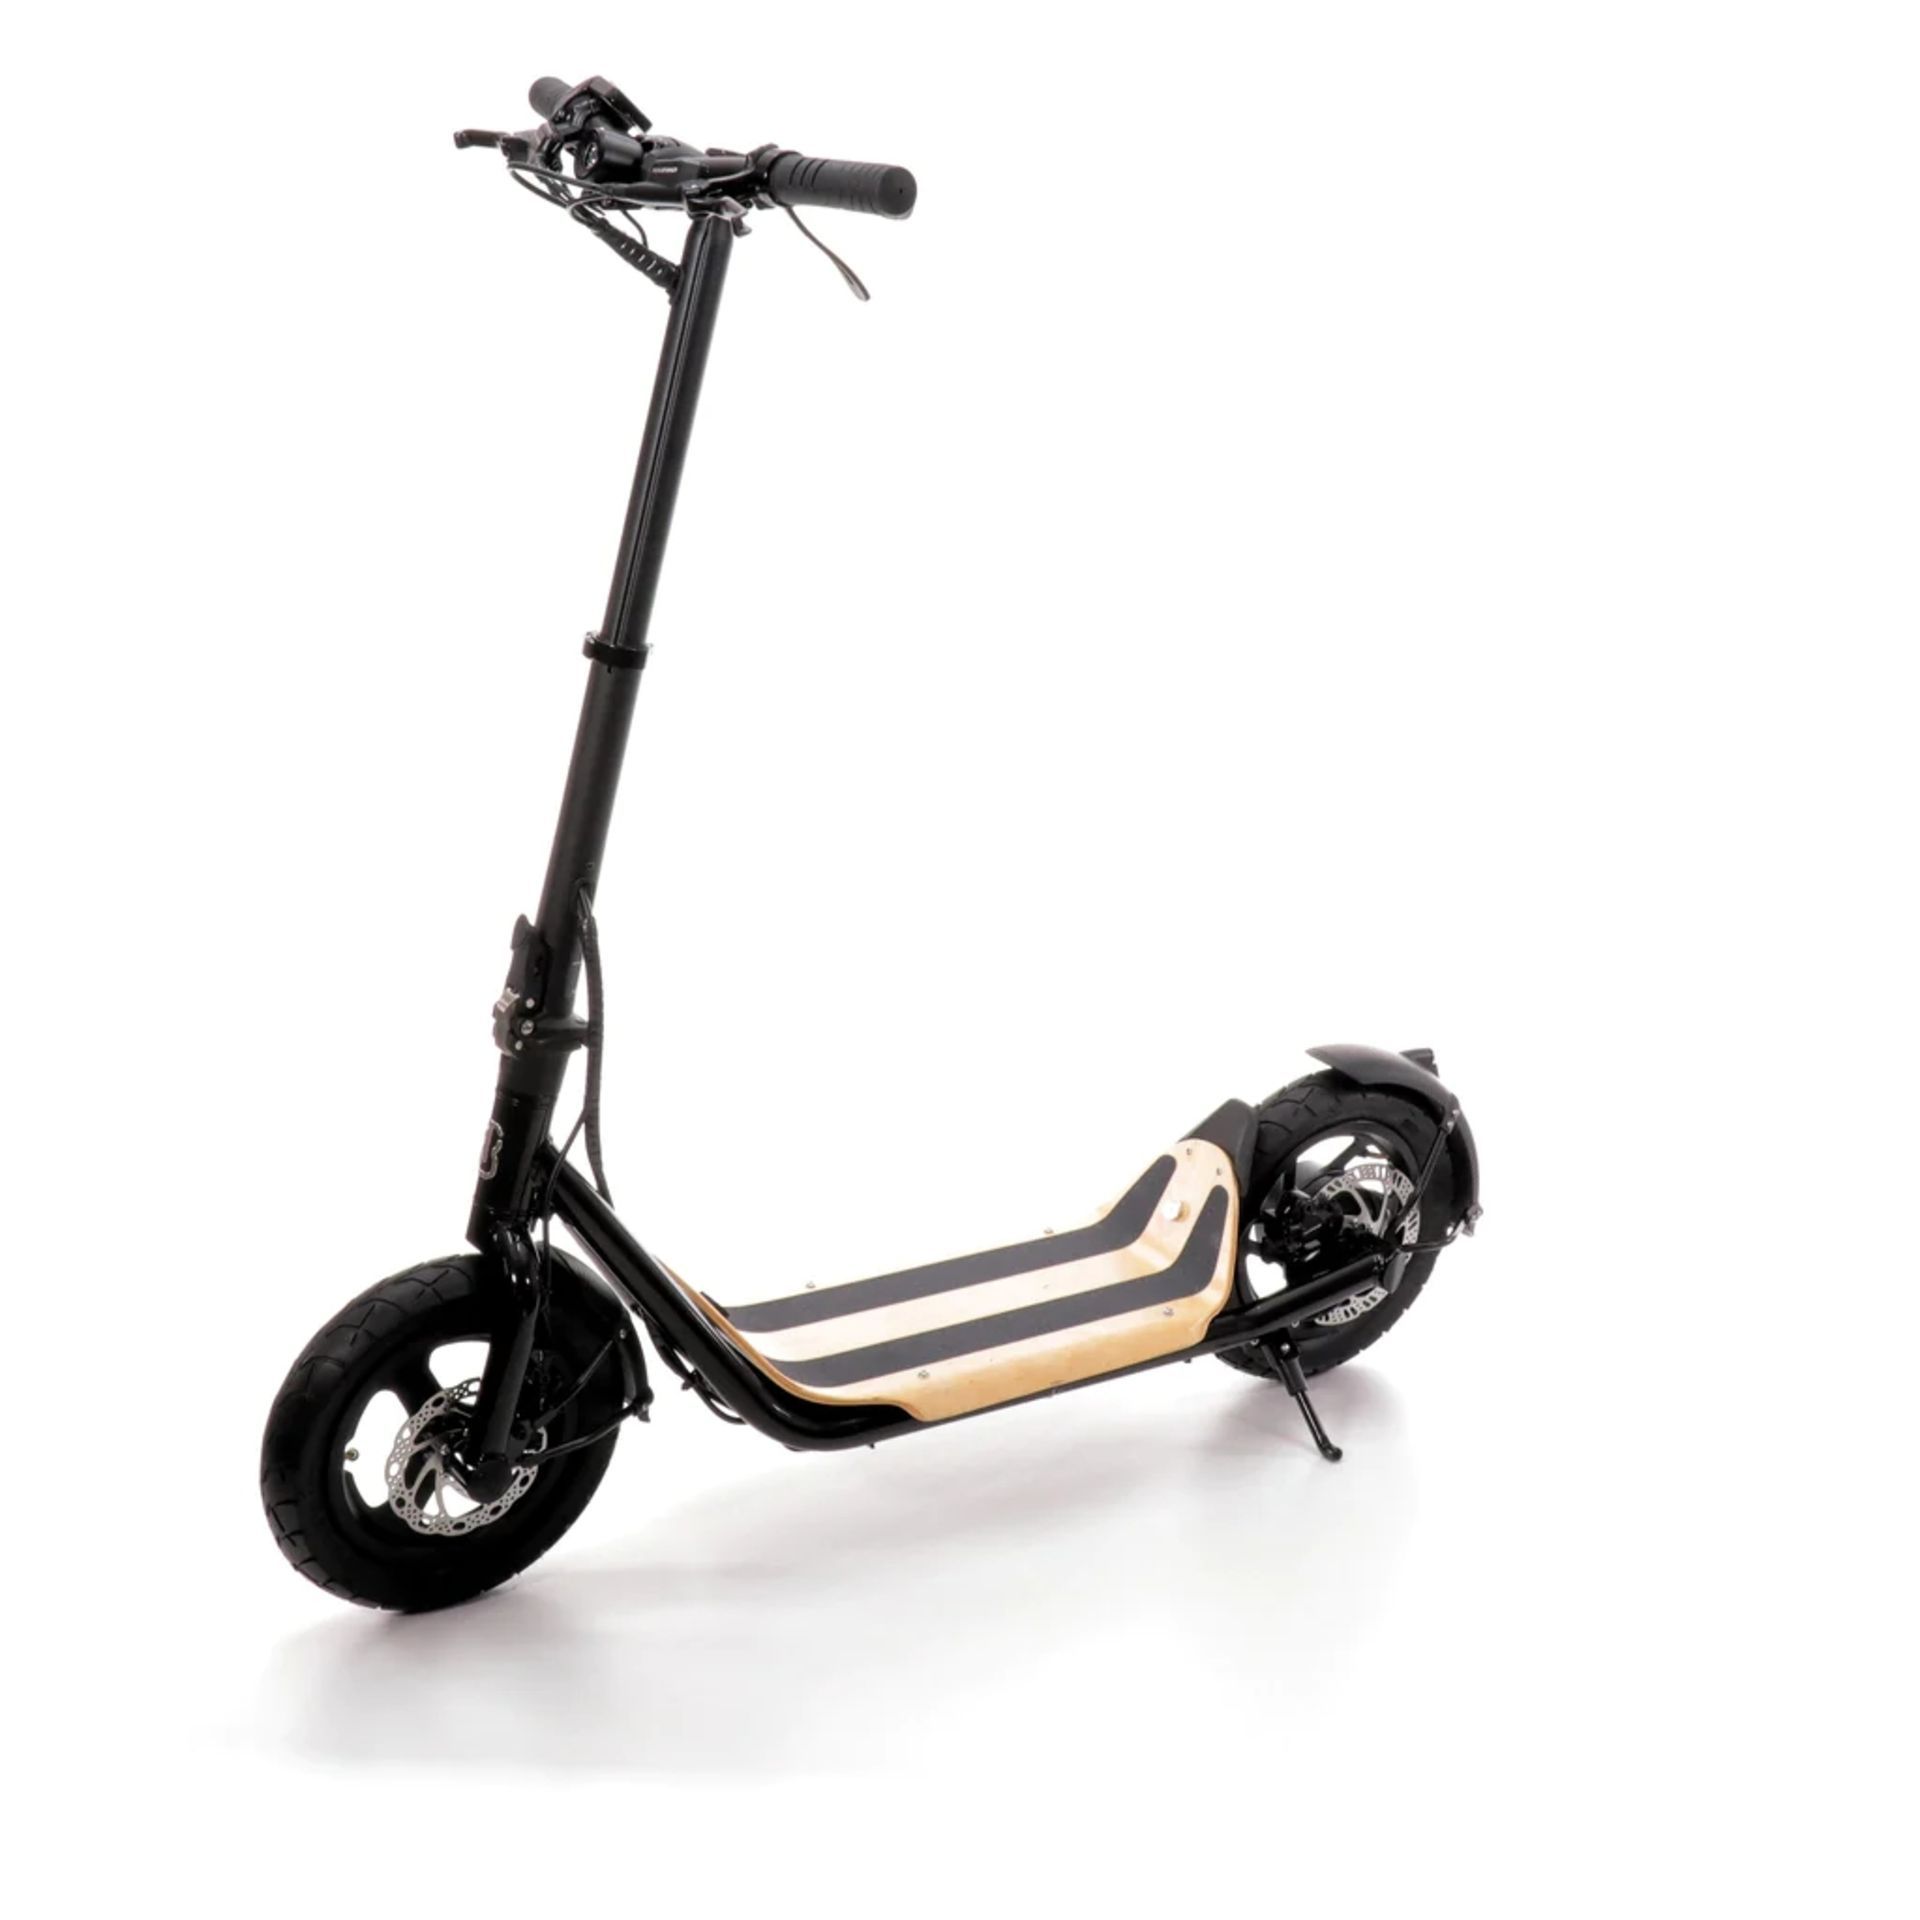 BRAND NEW 8TEV B12 PROXI ELECTRIC SCOOTER MATT BLACK RRP £1299, Perfect city commuter vehicle with